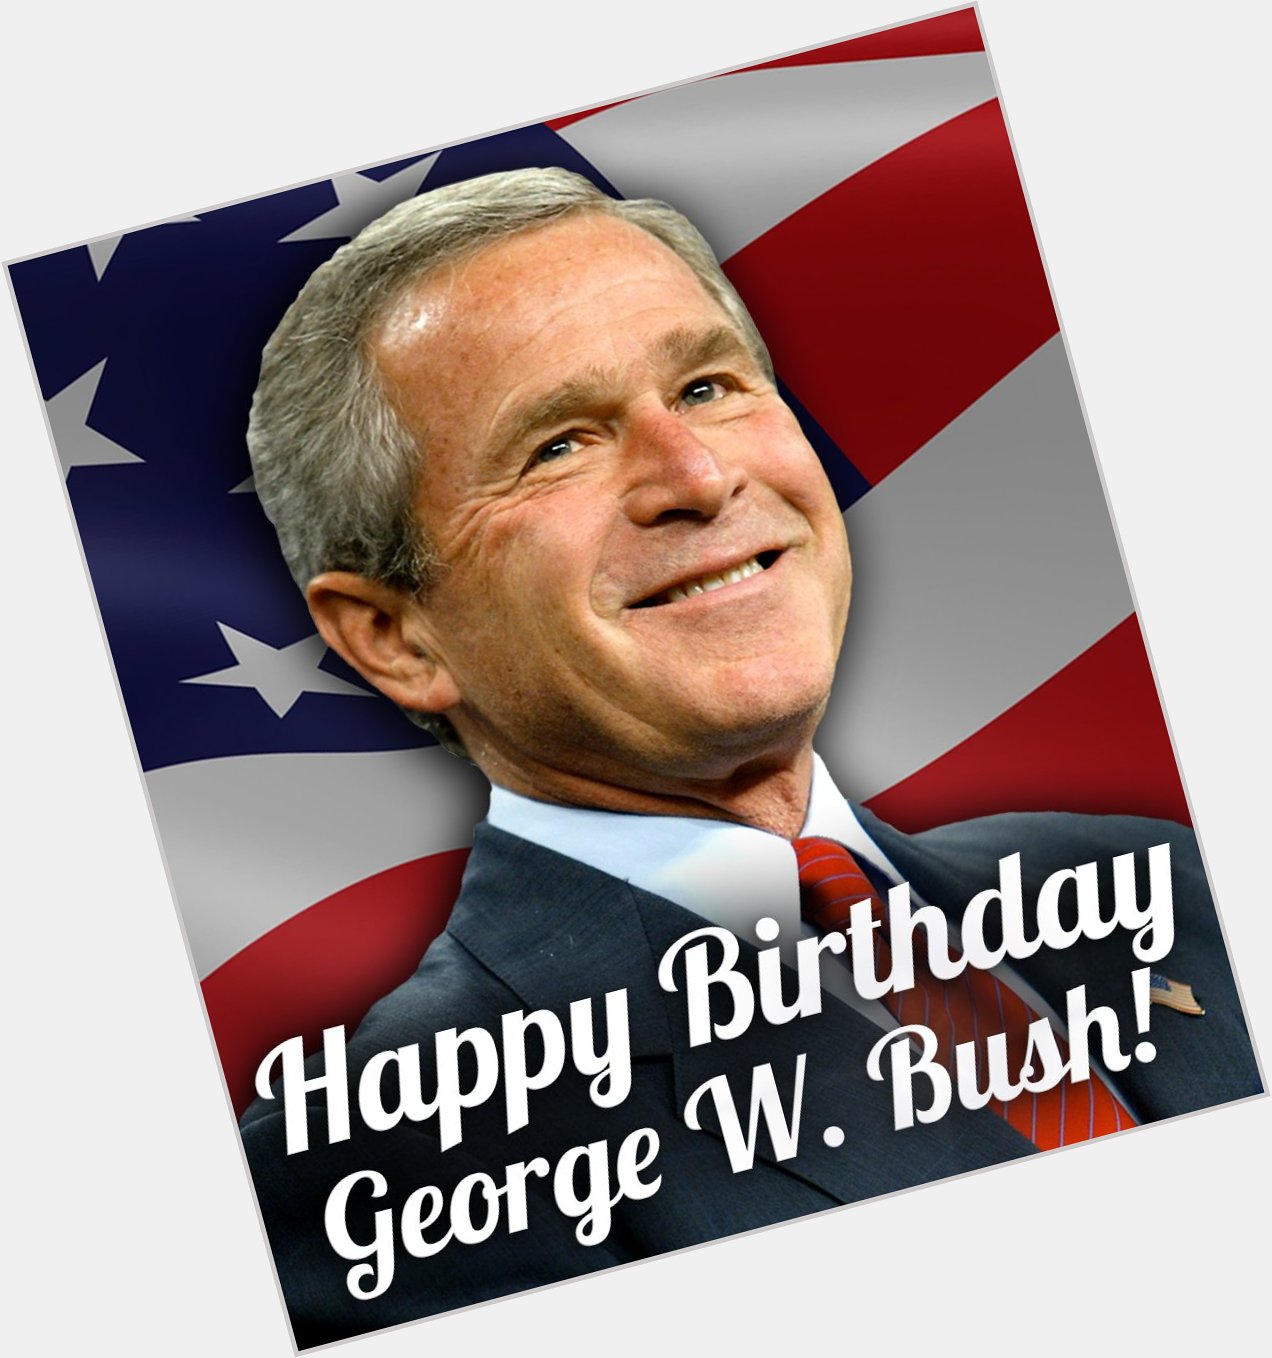 Join us in wishing a happy birthday to former President George W. Bush. He turns 71 today. 